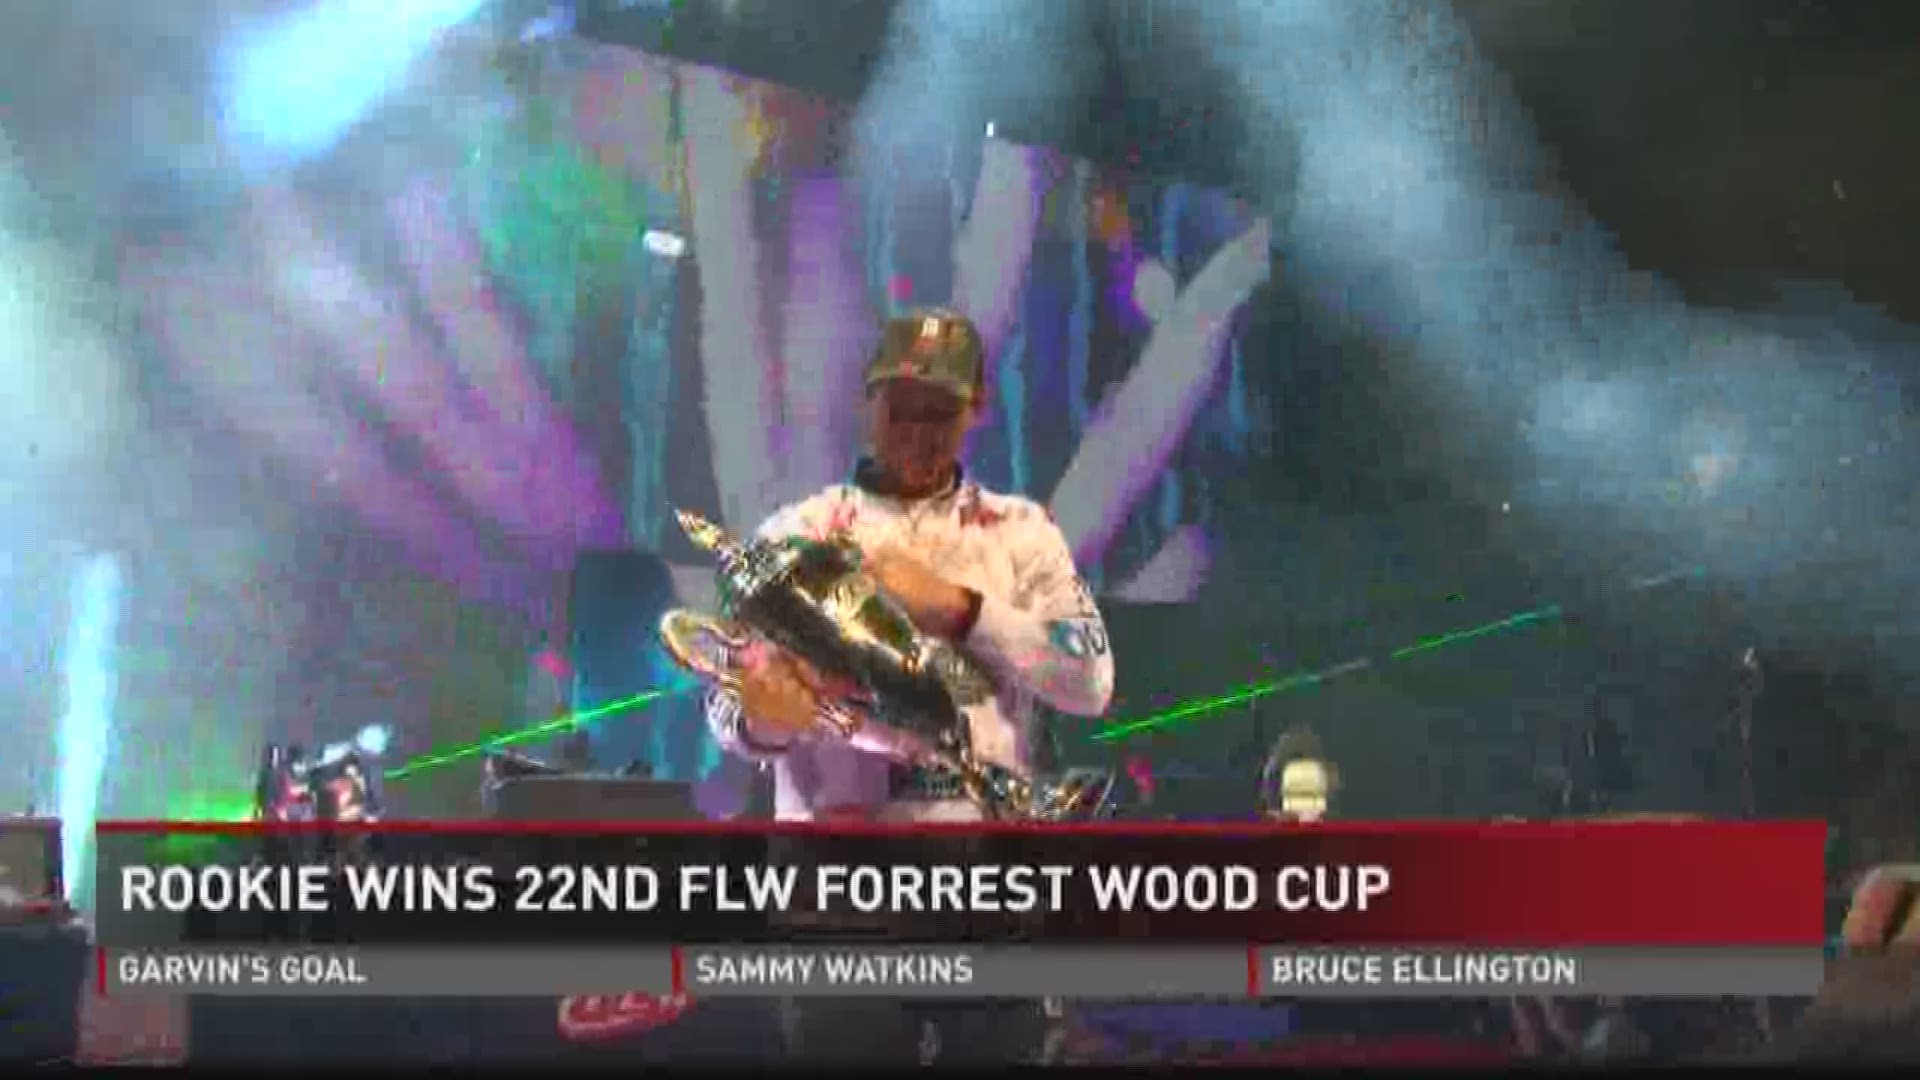 Two Palmetto State Anglers finish in the top five of the 22nd FLW Forrest Wood Cup but a rookie out of Alabama captures the title and $300,000.